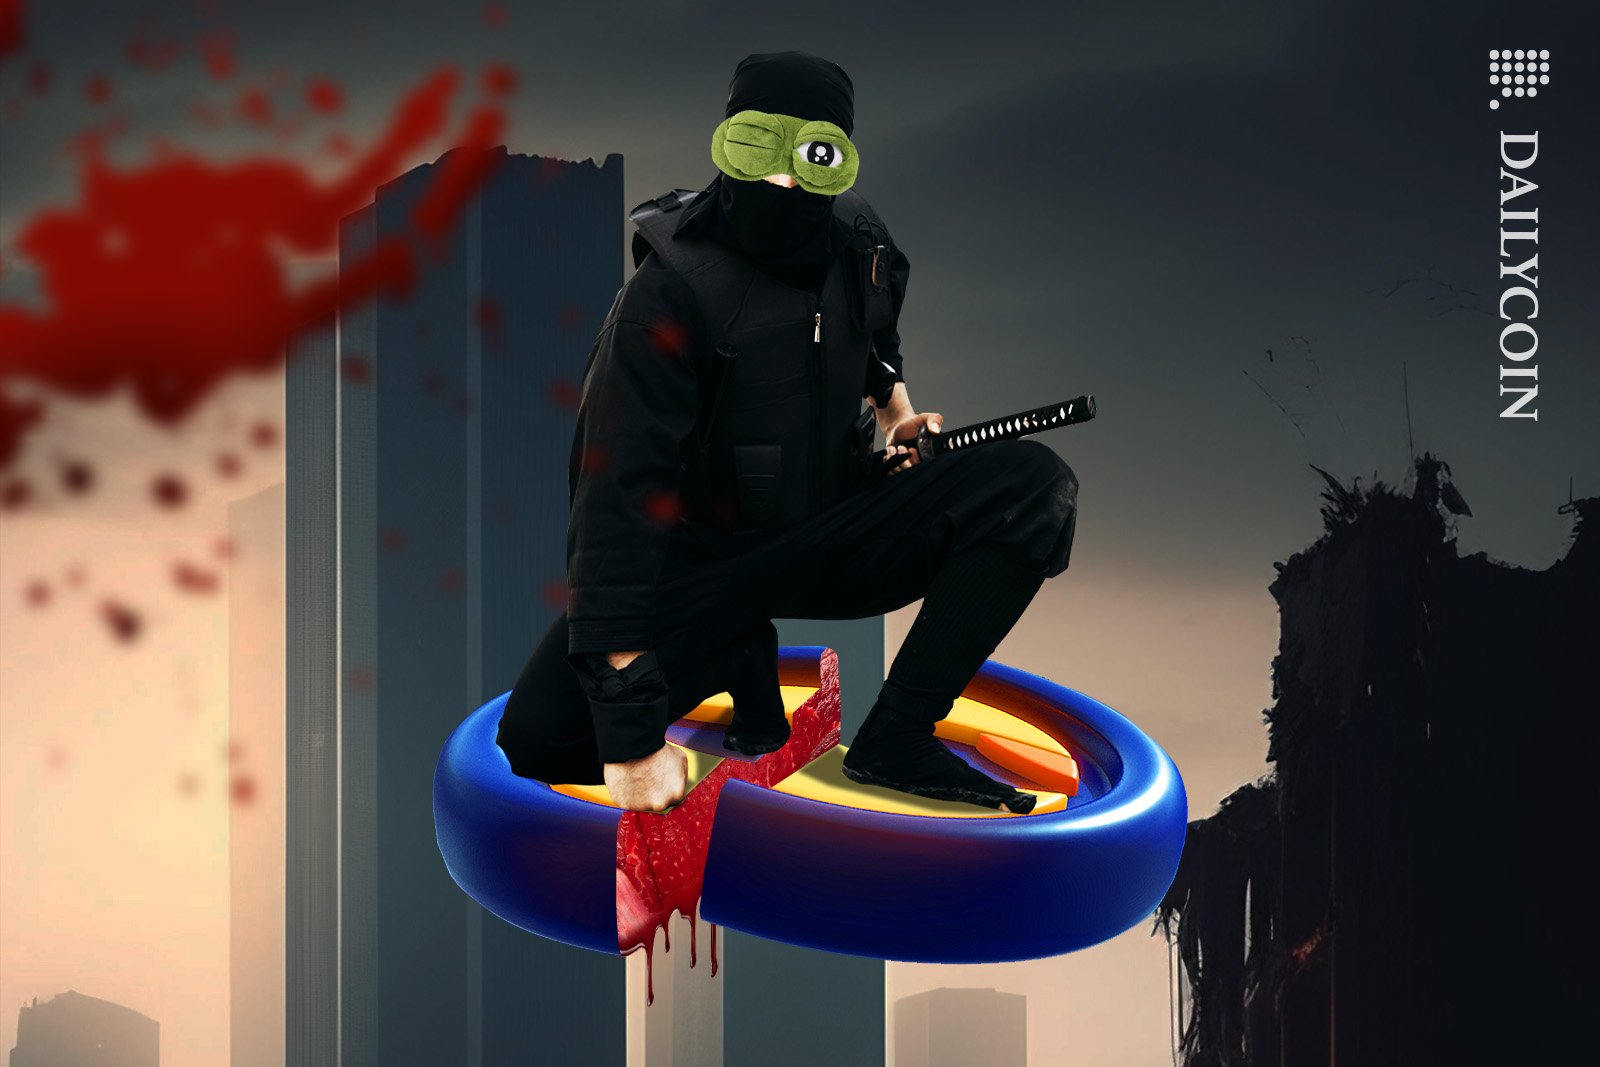 A ninja wearing a PEPE the frog mask standing on a slaughtered LUNA coin.